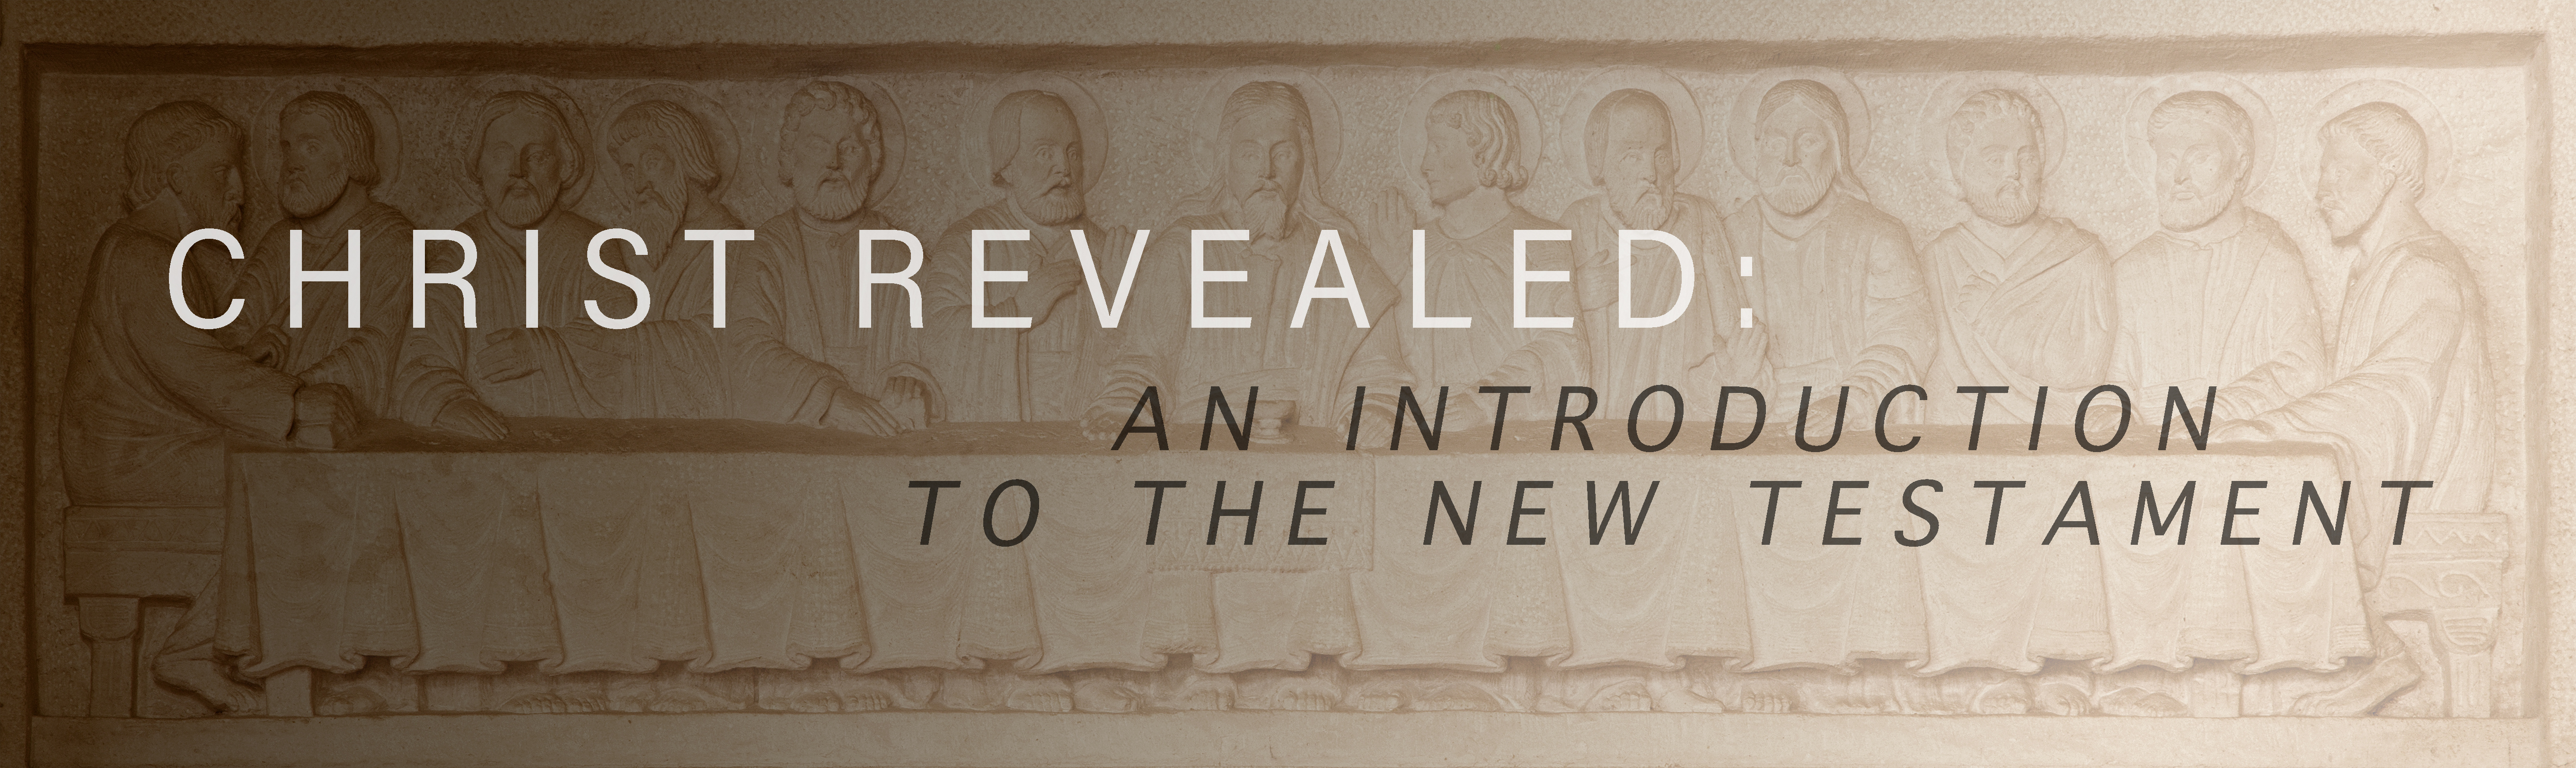 Christ Revealed: An Introduction to the New Testament banner